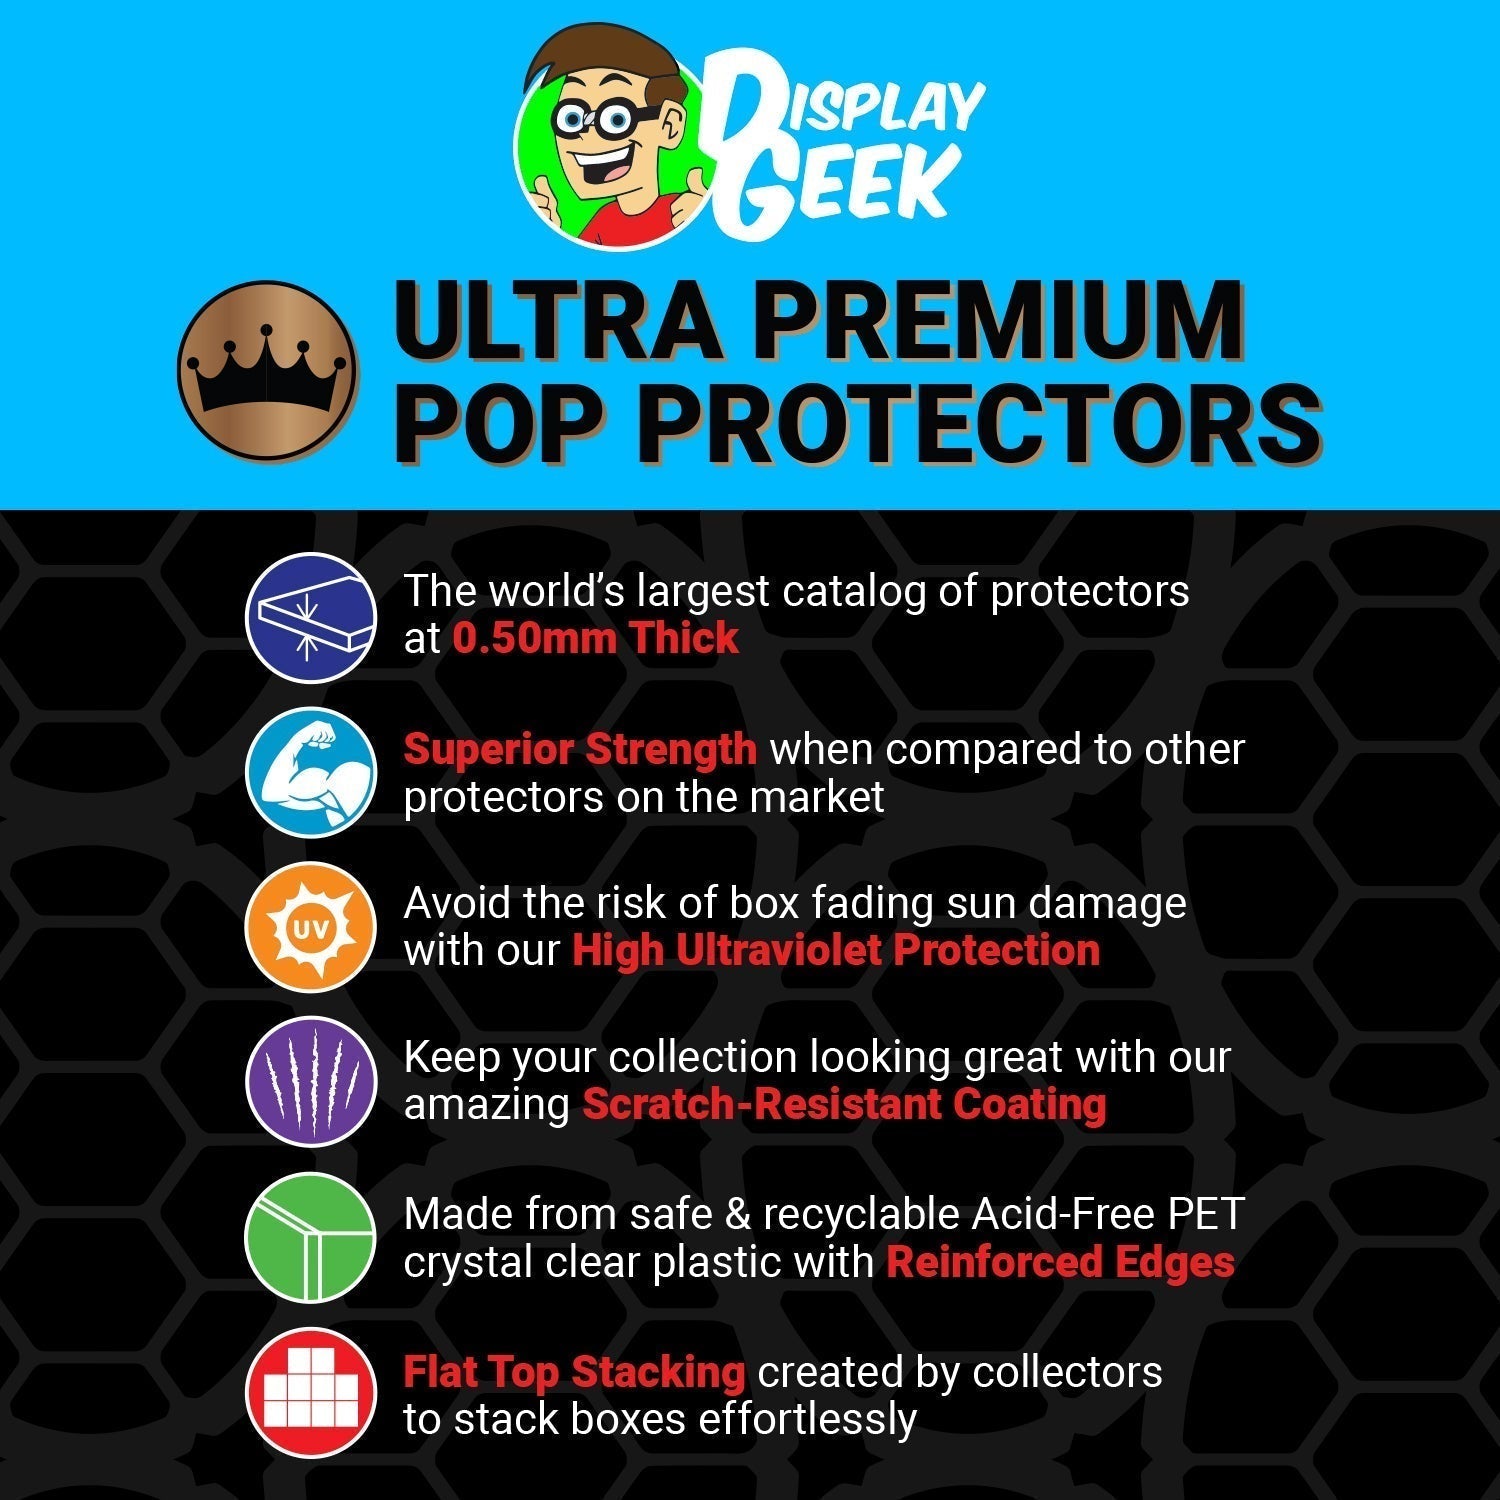 Pop Protector for Pop & Tee Himiko Toga Unmasked #1029 Funko Box - PPG Pop Protector Guide Search Created by Display Geek